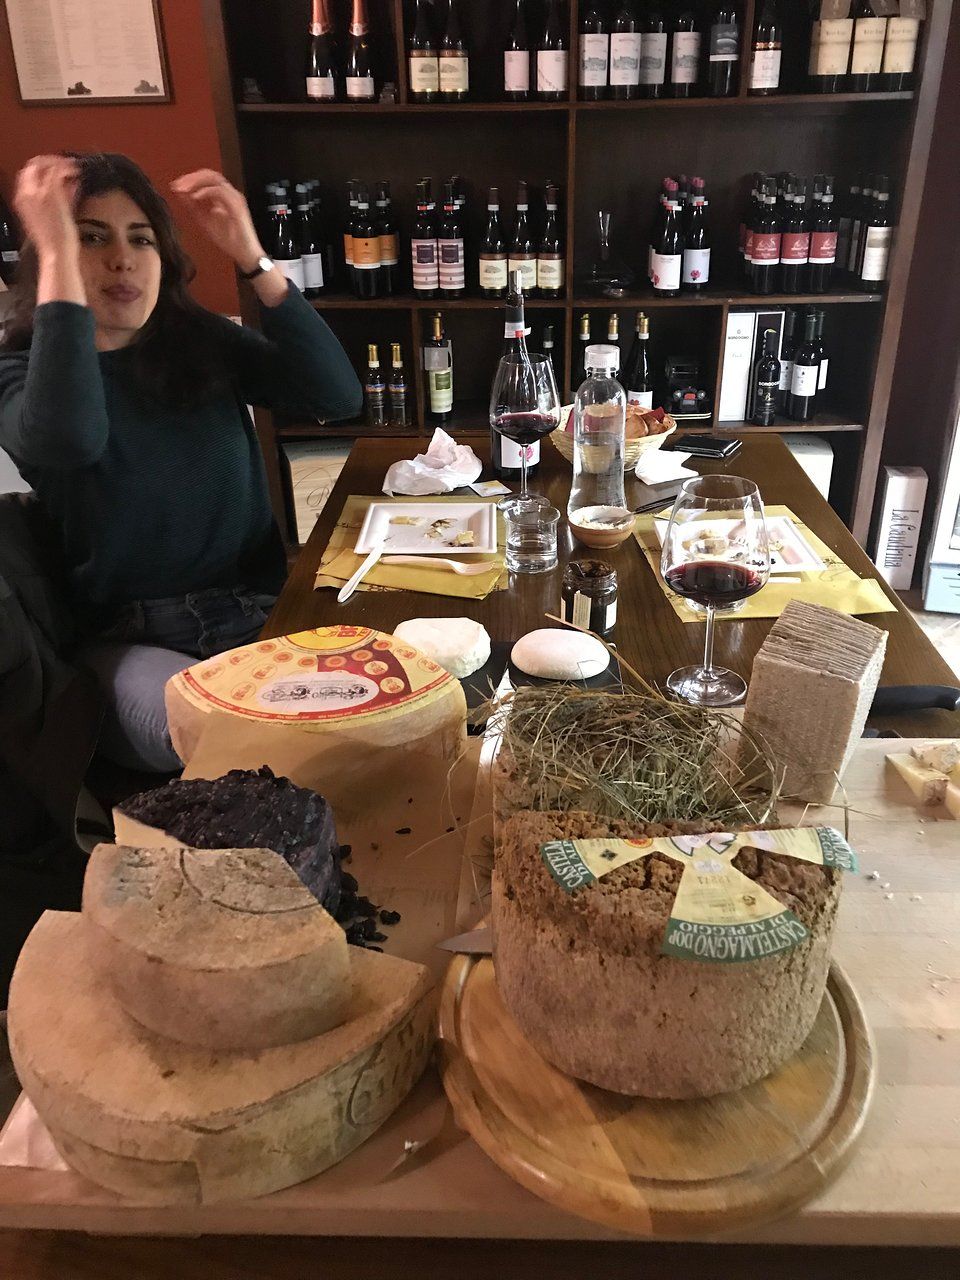 Woman drinking wine next to cheese wheels